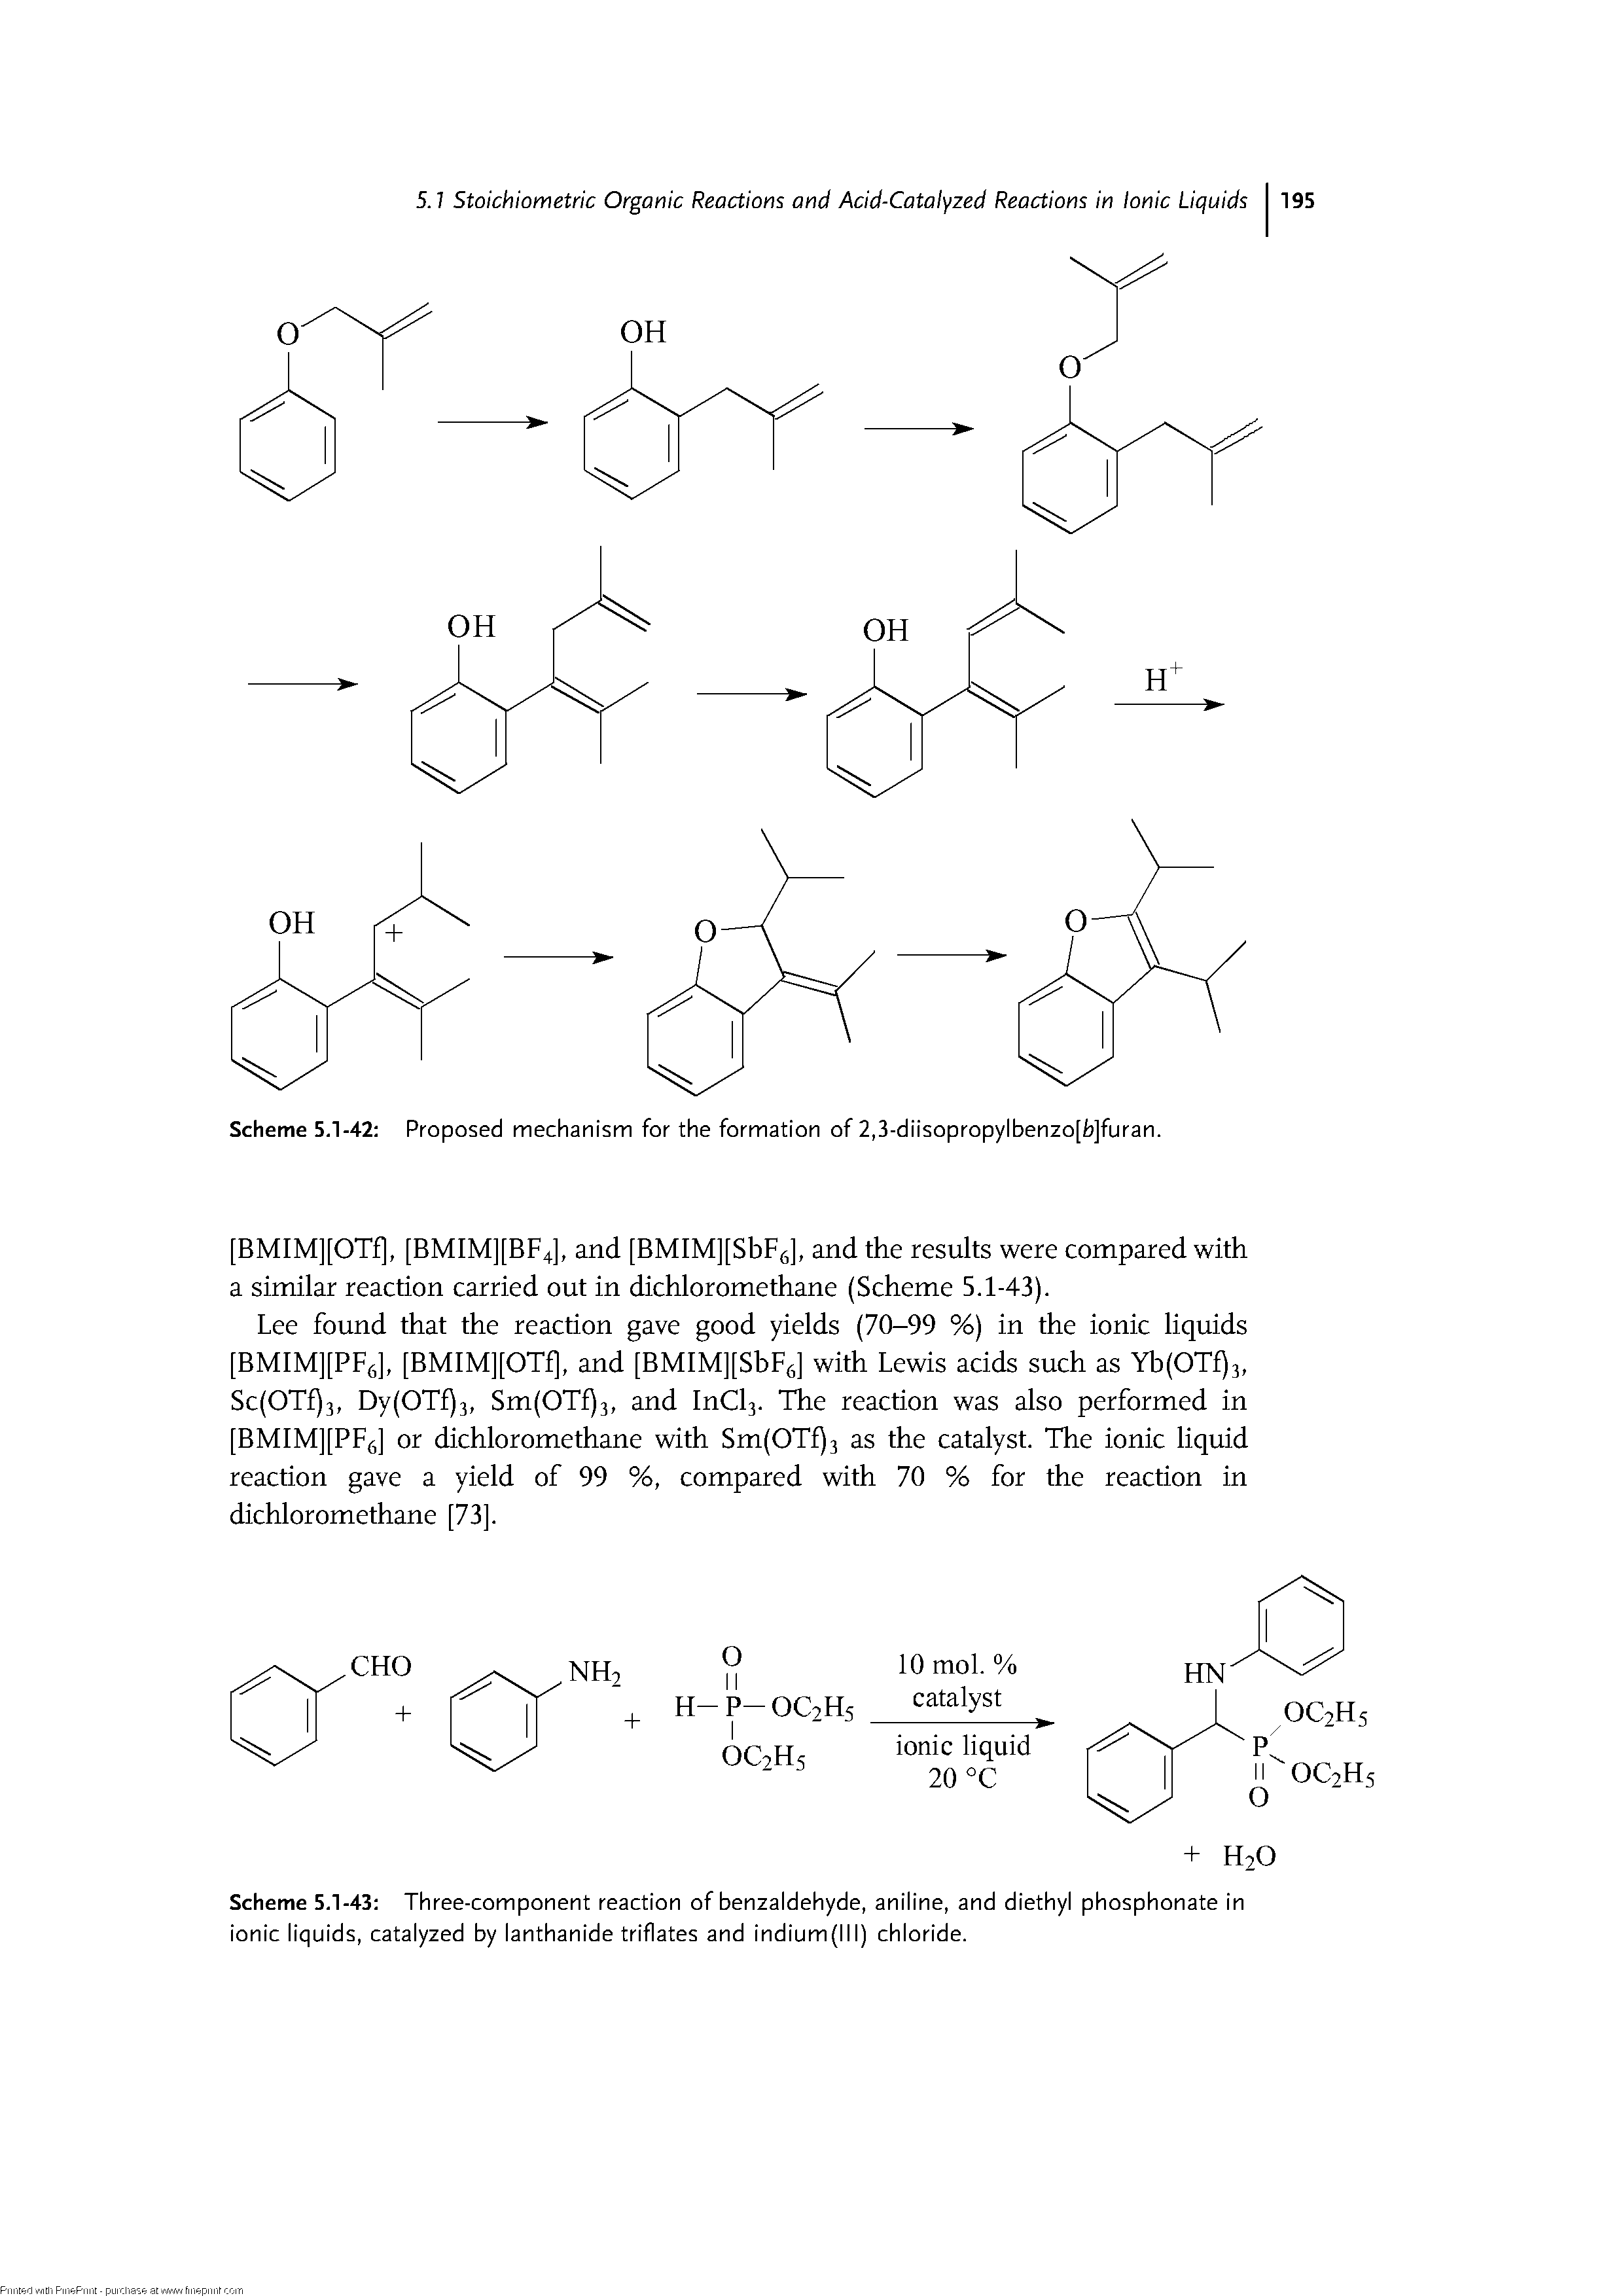 Scheme 5.1-43 Three-component reaction of benzaldehyde, aniline, and diethyl phosphonate in ionic liquids, catalyzed by lanthanide triflates and indium(lll) chloride.